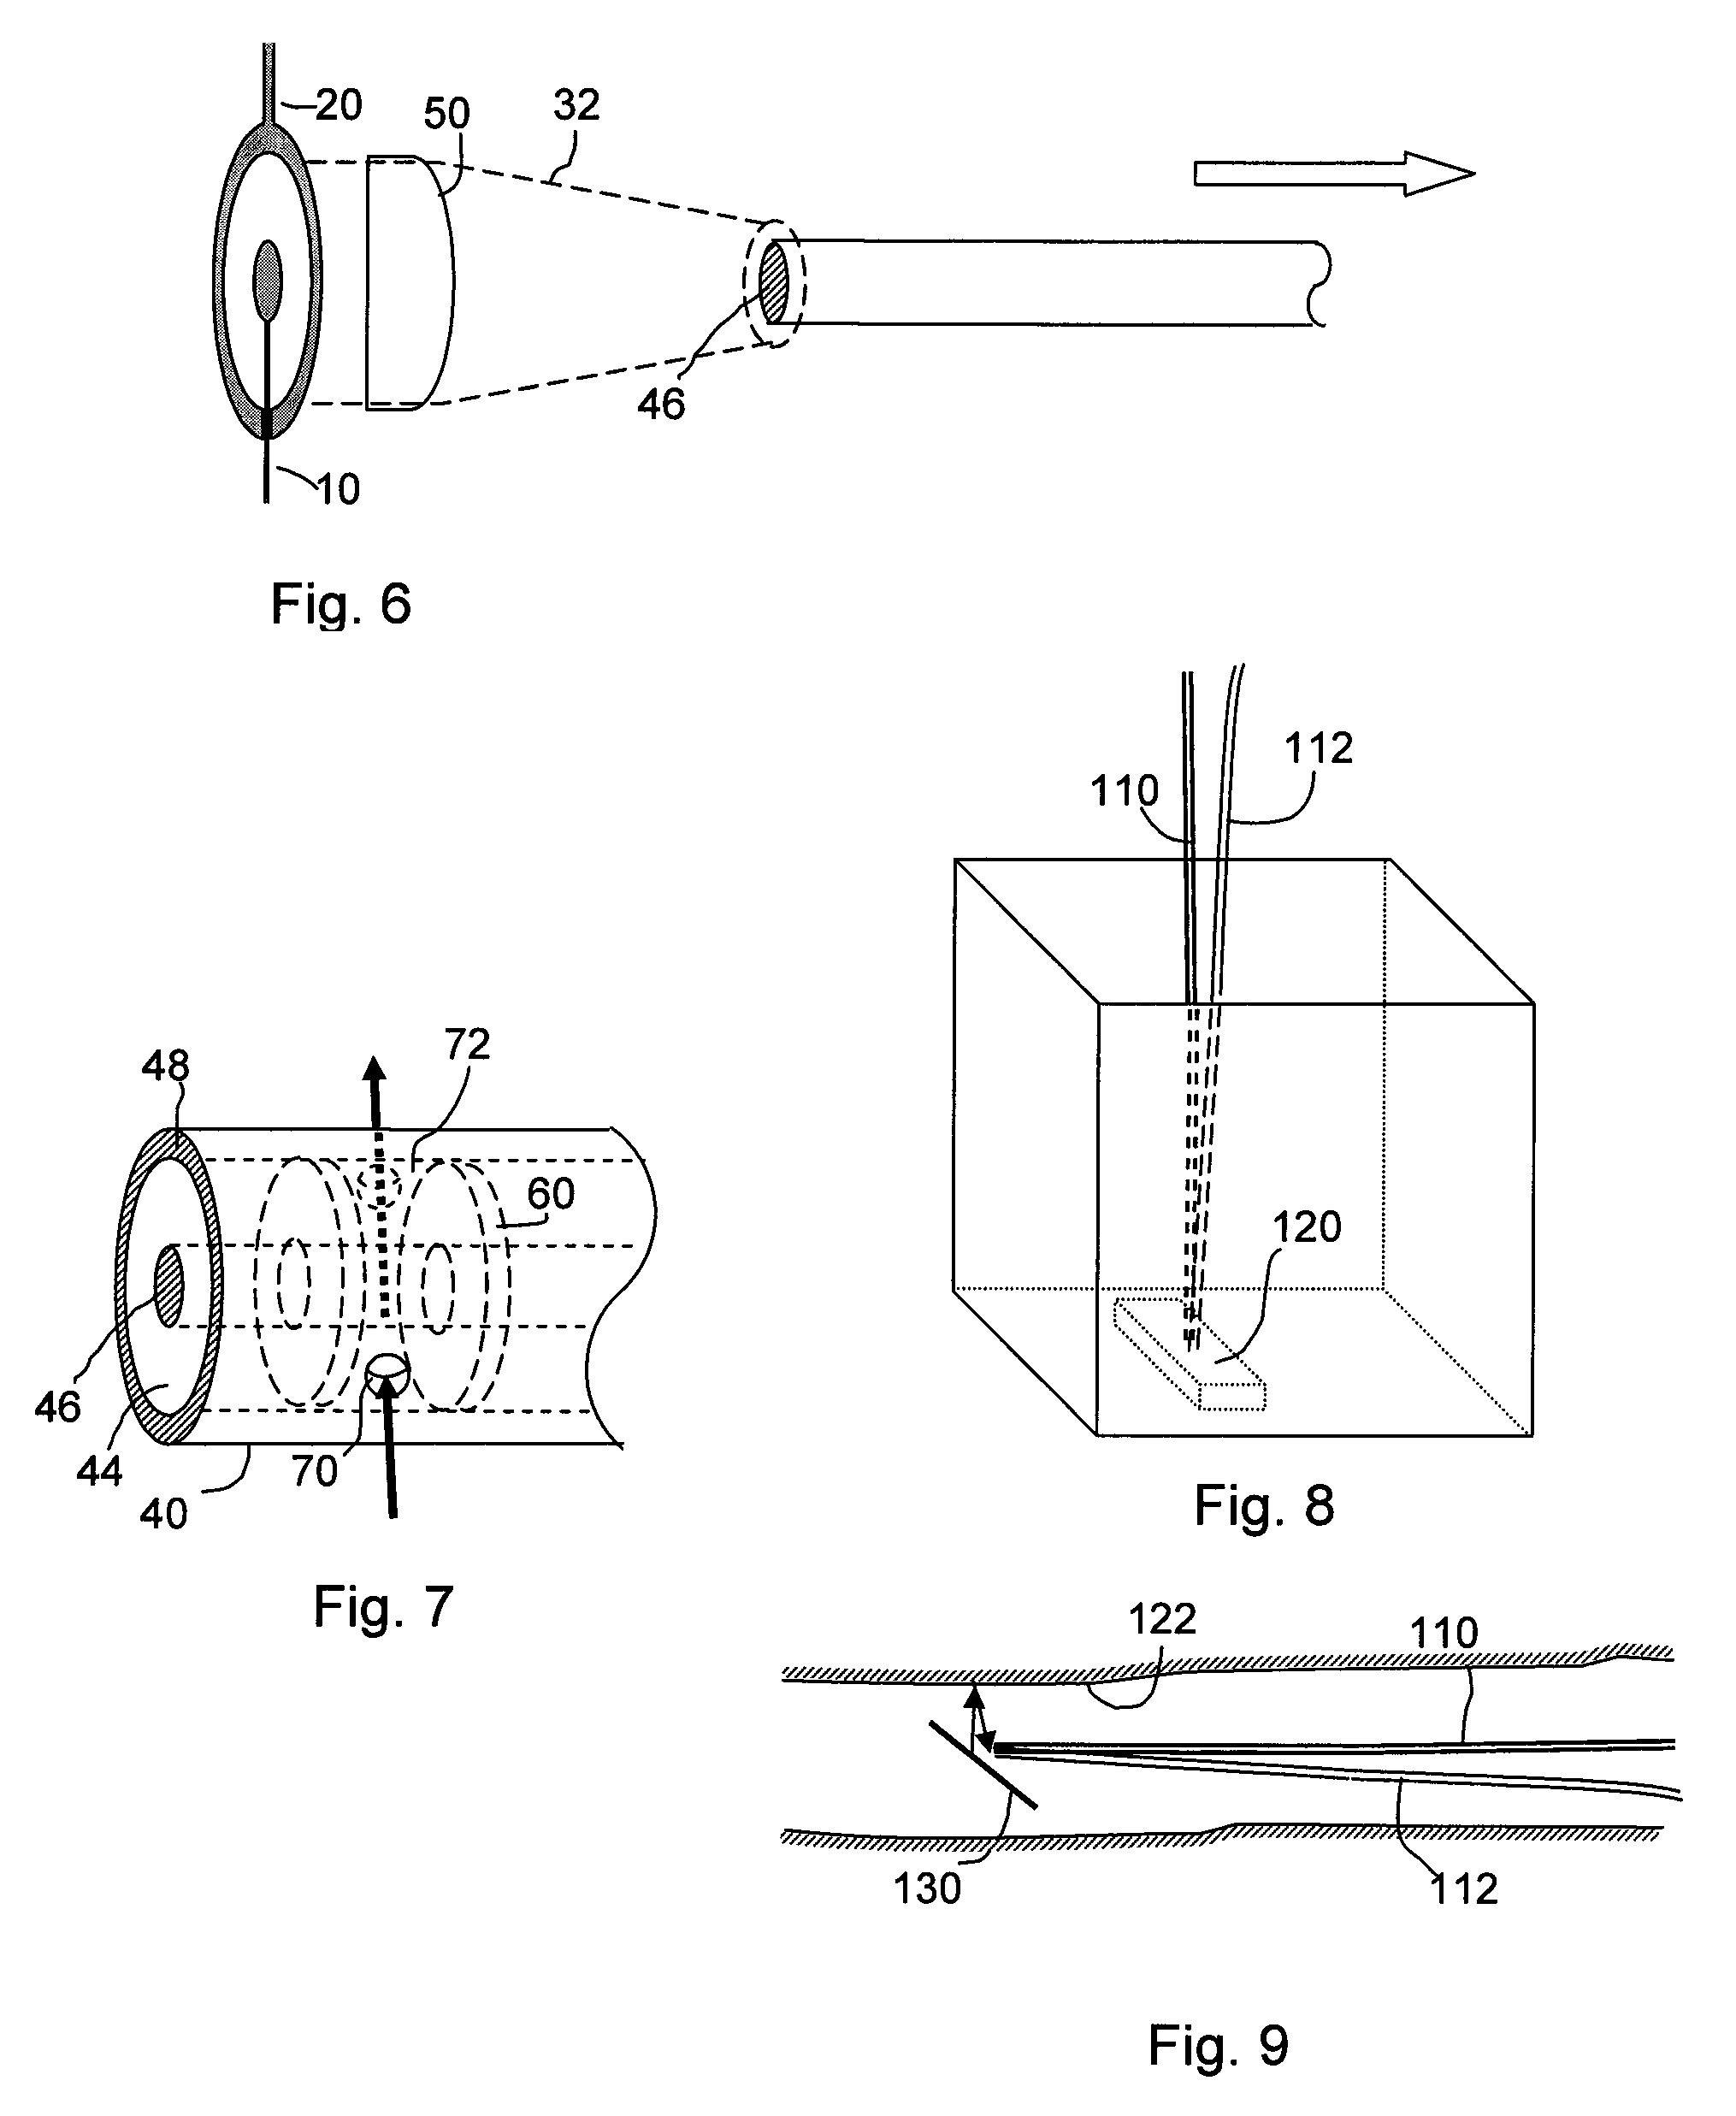 Method for coupling terahertz pulses into a coaxial waveguide